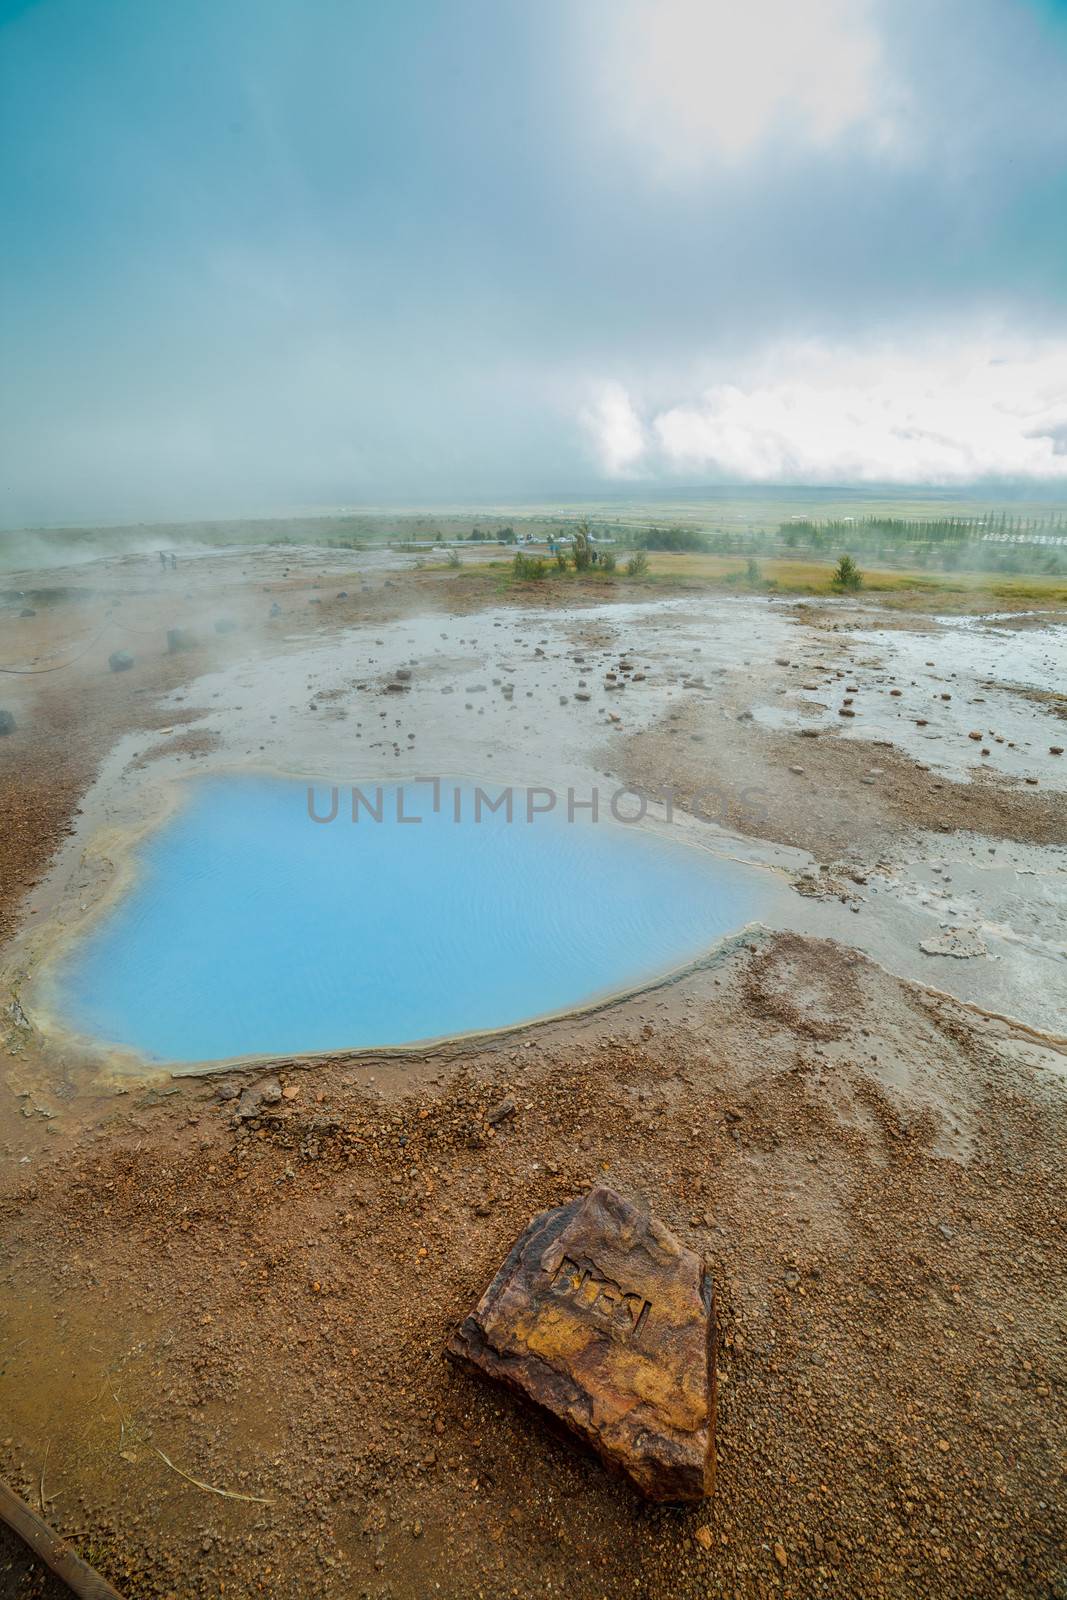 Geothermal activity with hot springs landscape, Iceland. Vertical view